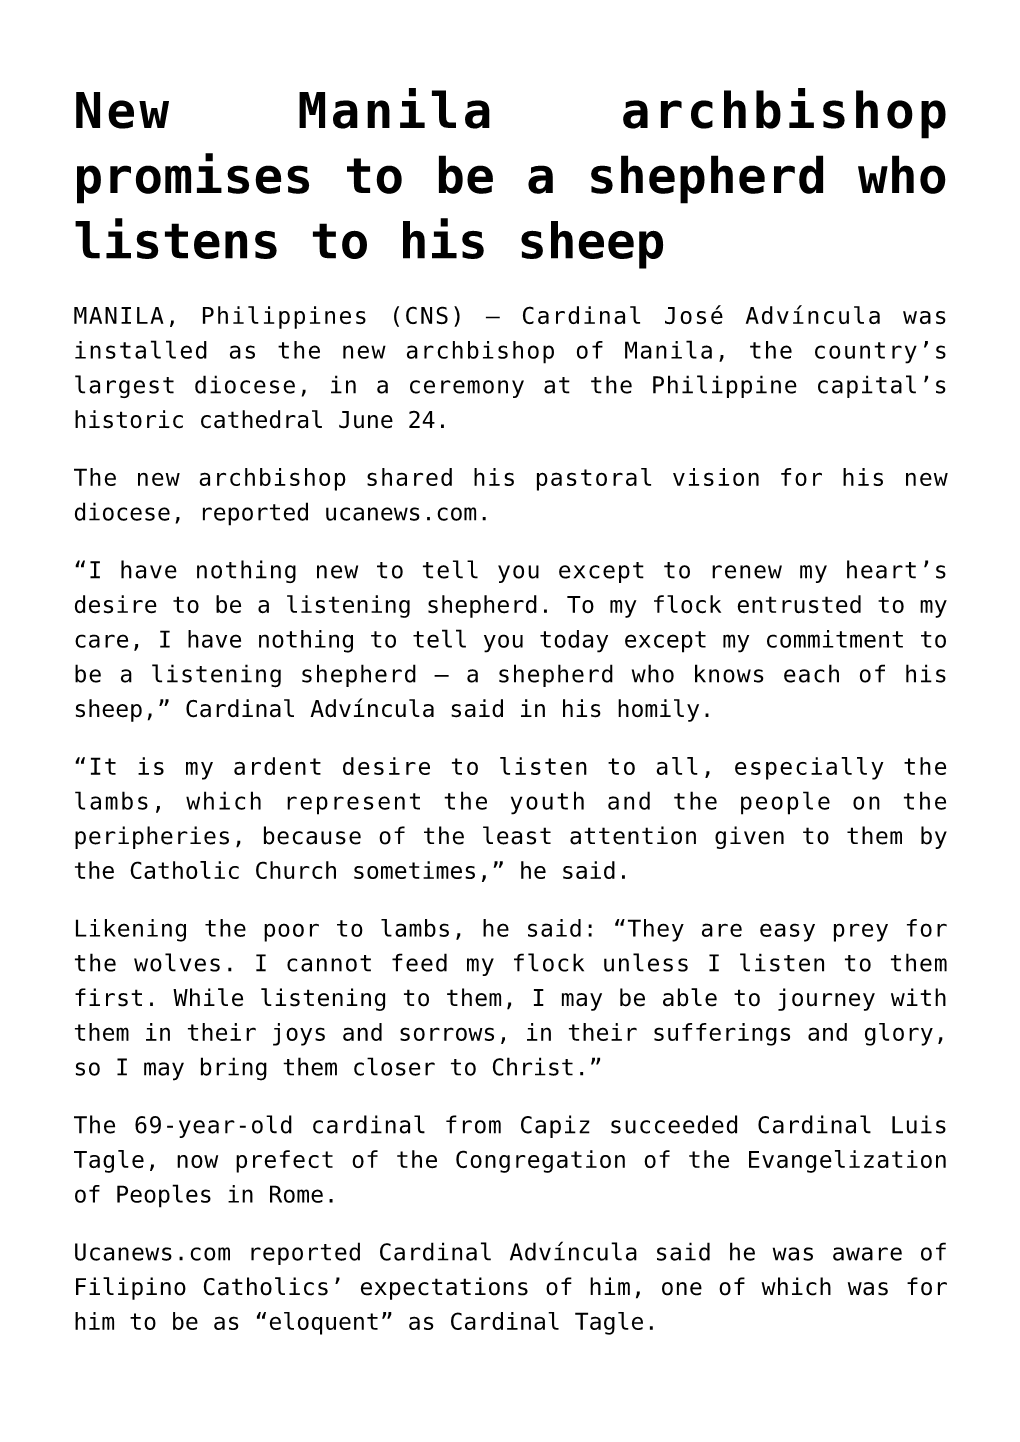 New Manila Archbishop Promises to Be a Shepherd Who Listens to His Sheep